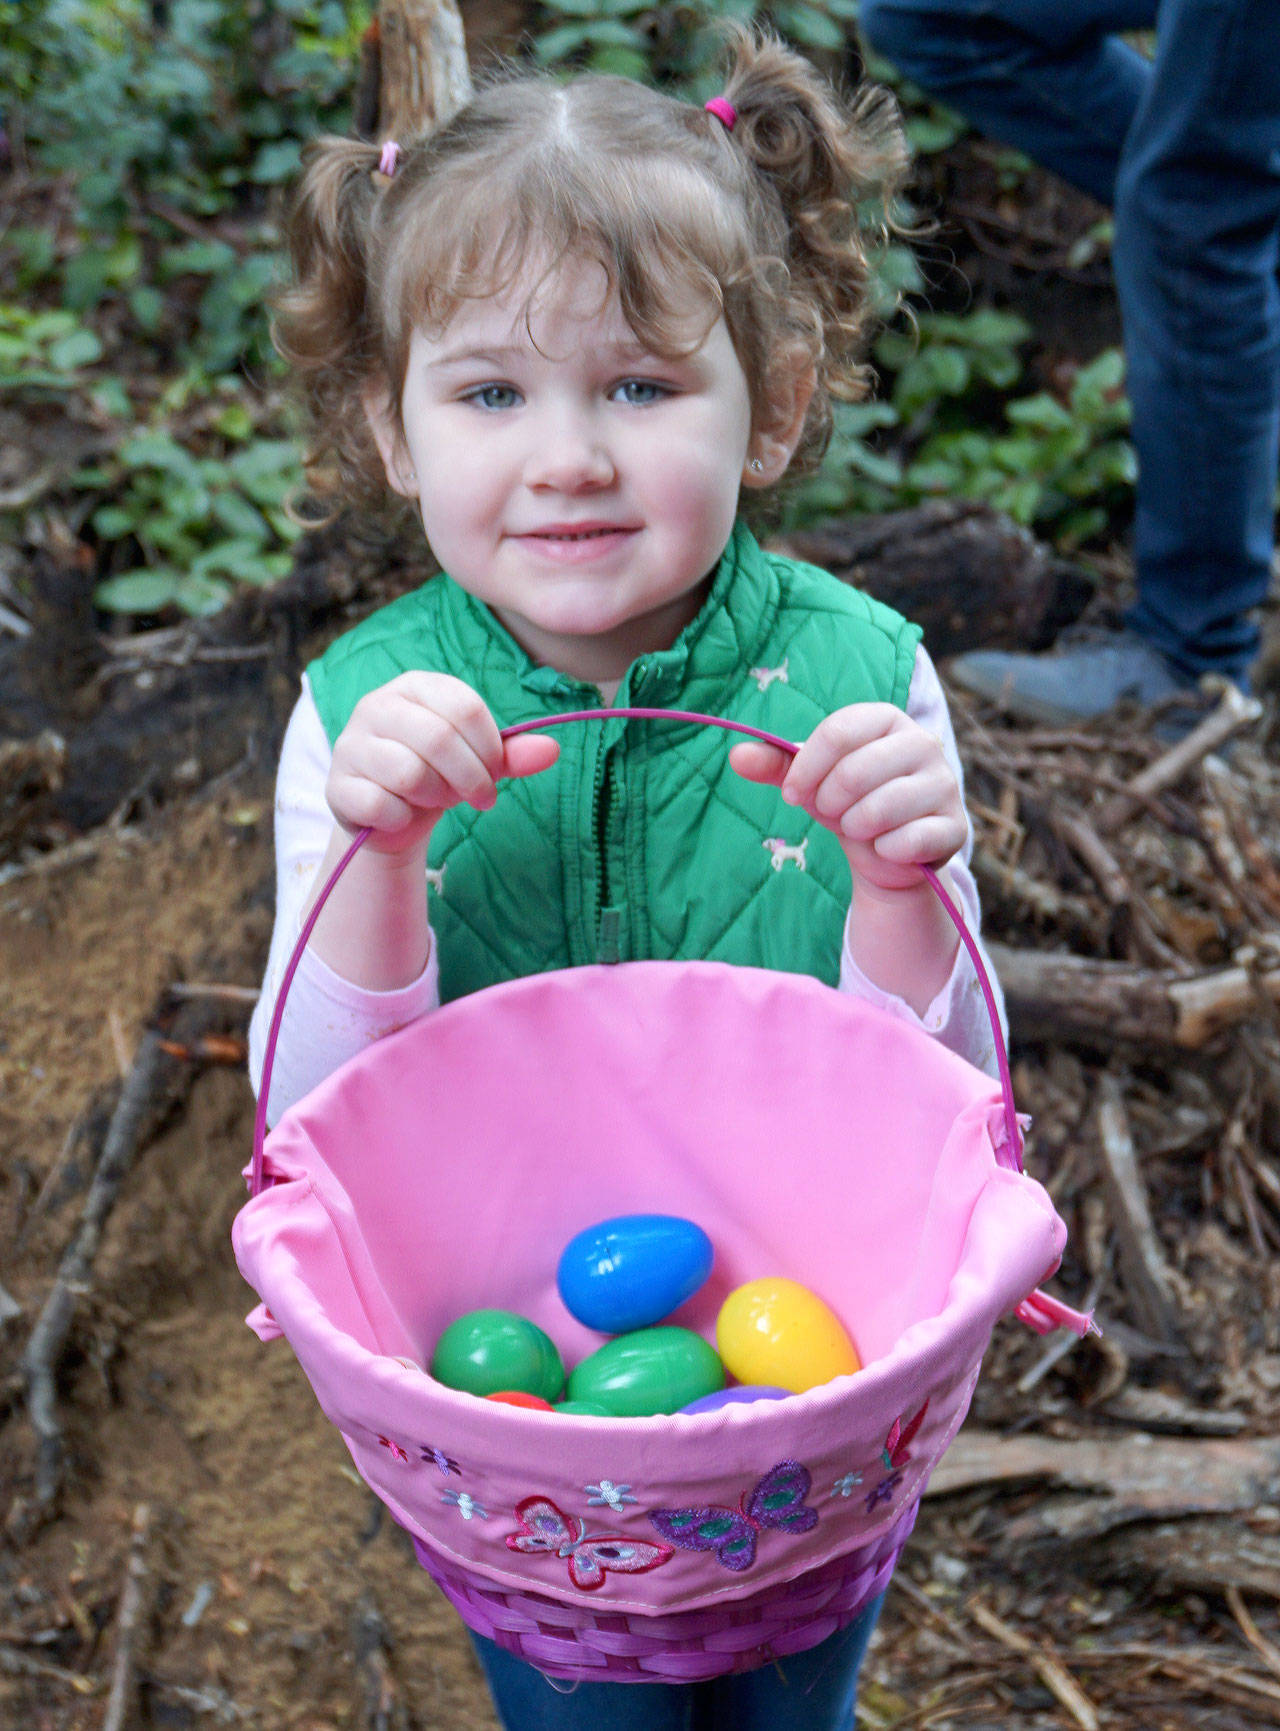 Annabelle Adams, 4, shows off the bounty of her Easter egg hunt Saturday at South Kitsap Regional Park. (Bob Smith | Kitsap Daily News)